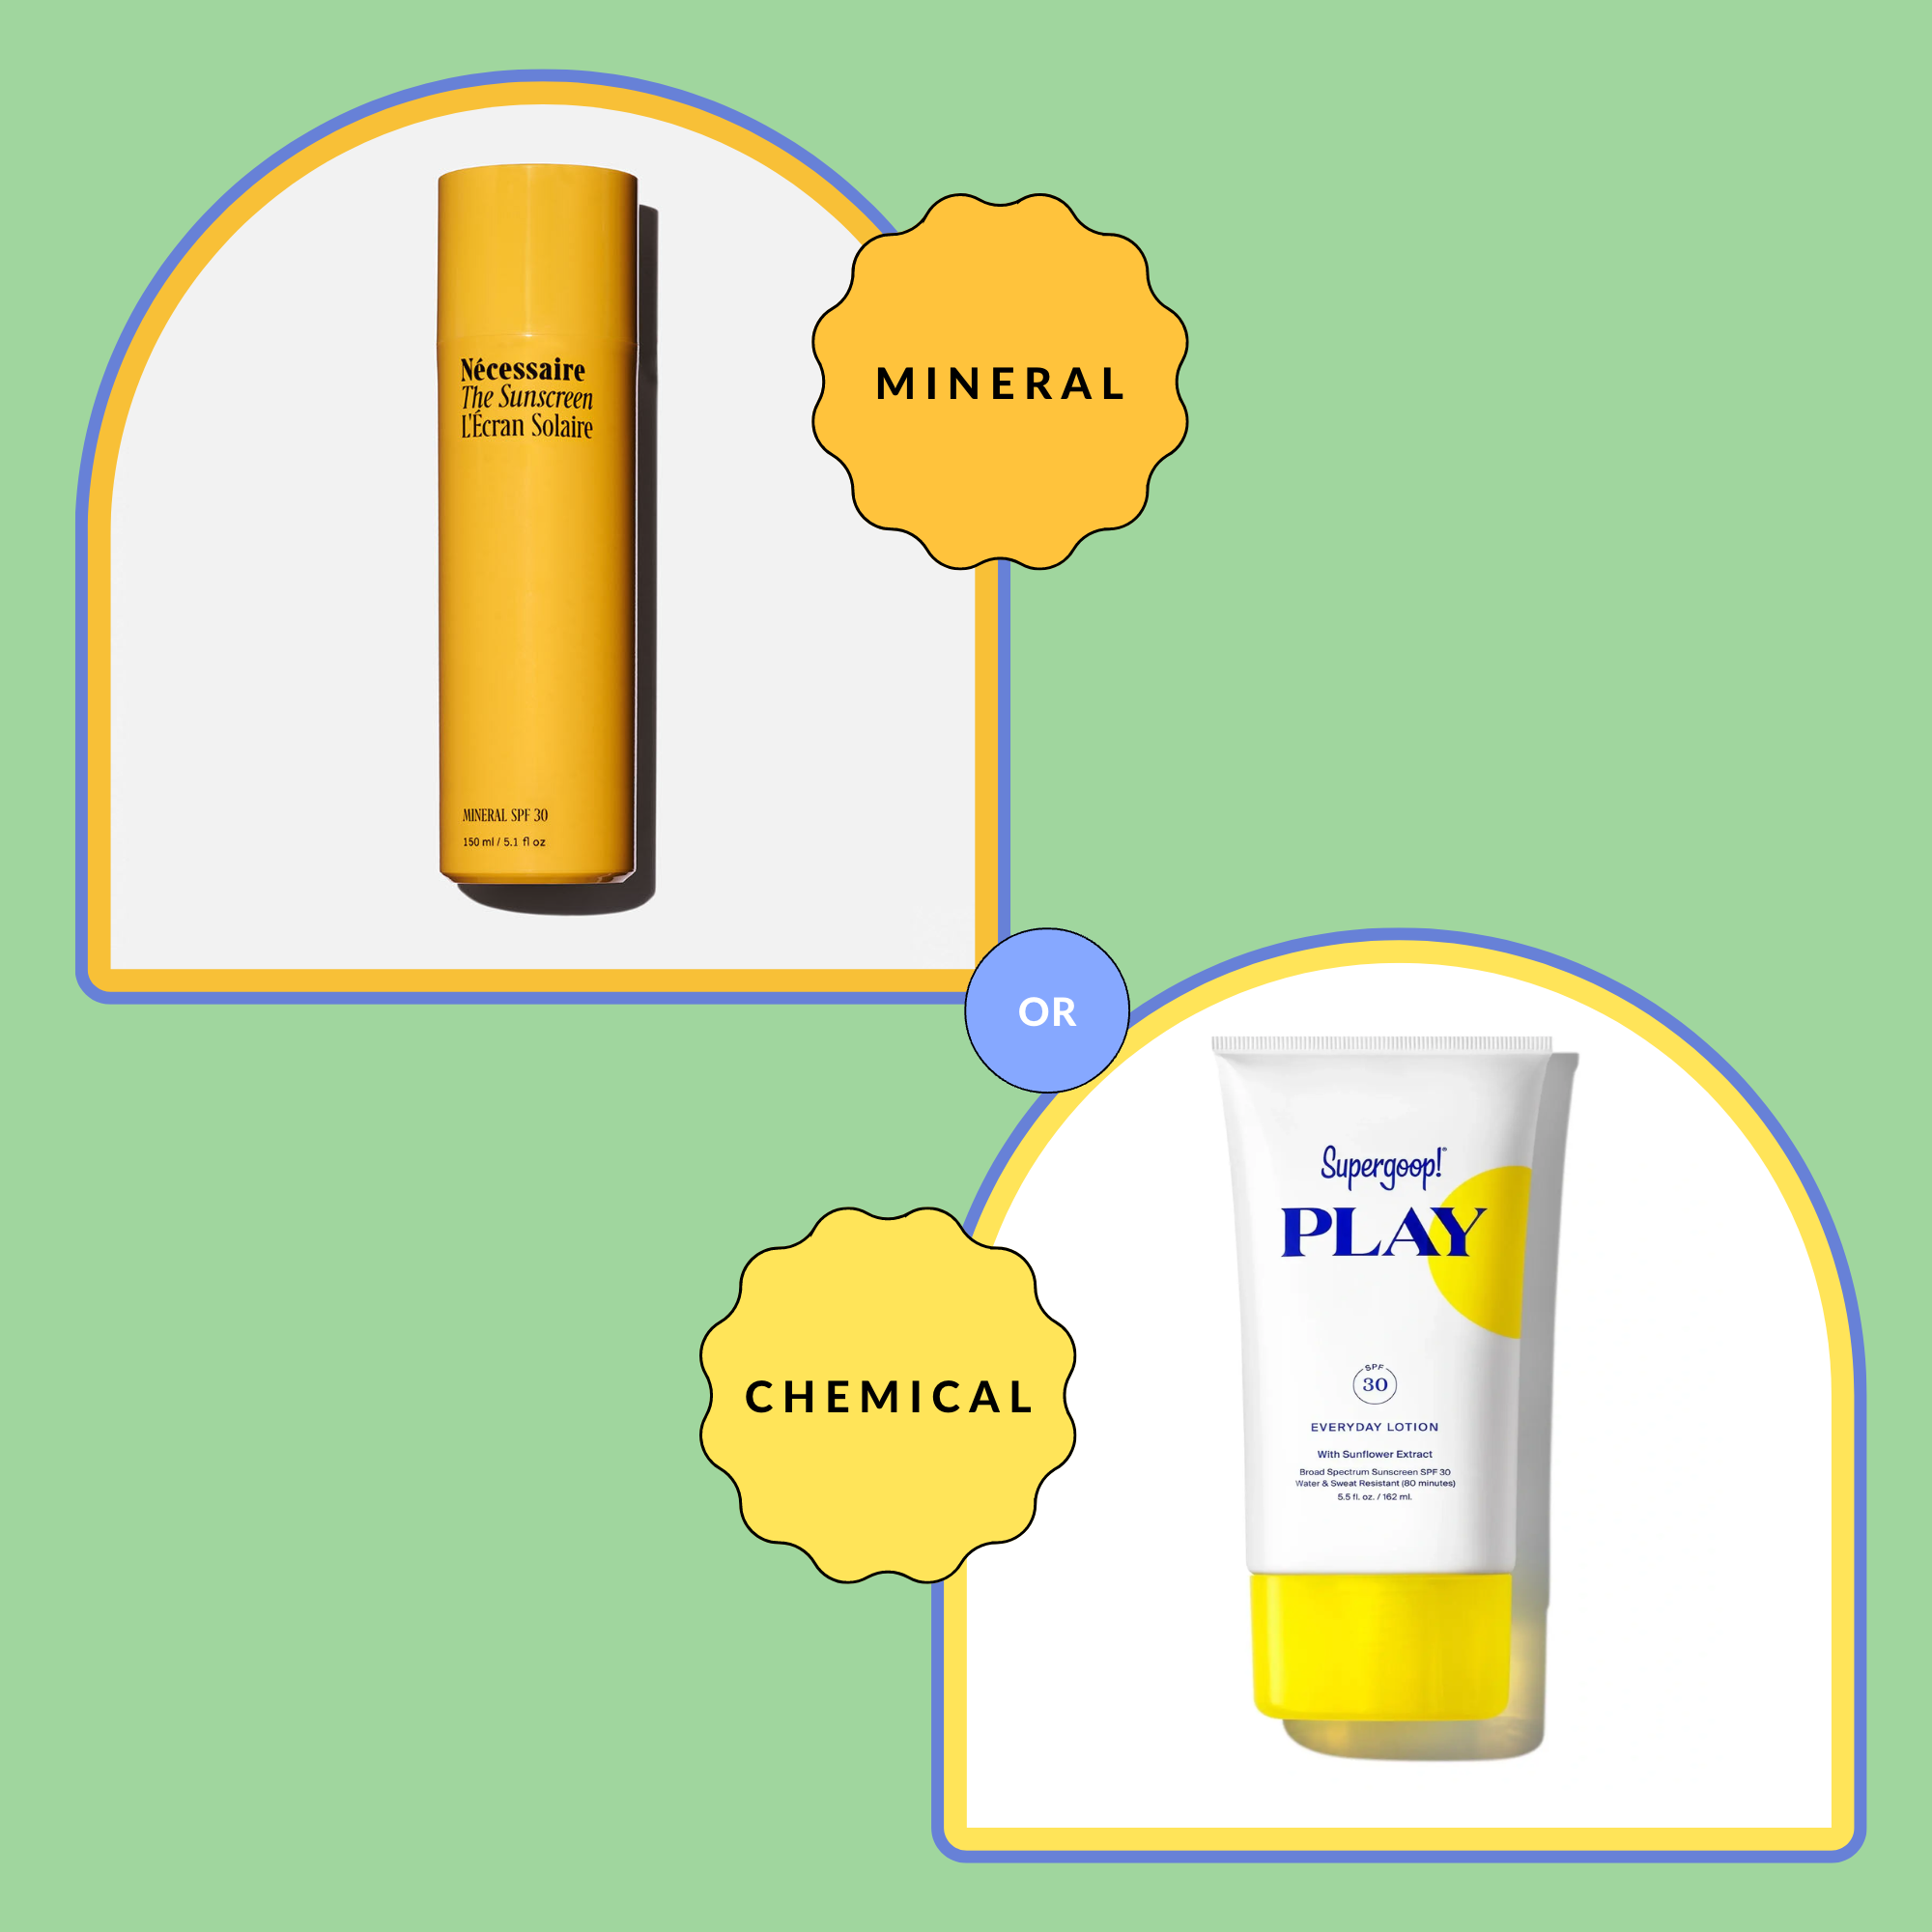 mineral vs chemical sunscreen